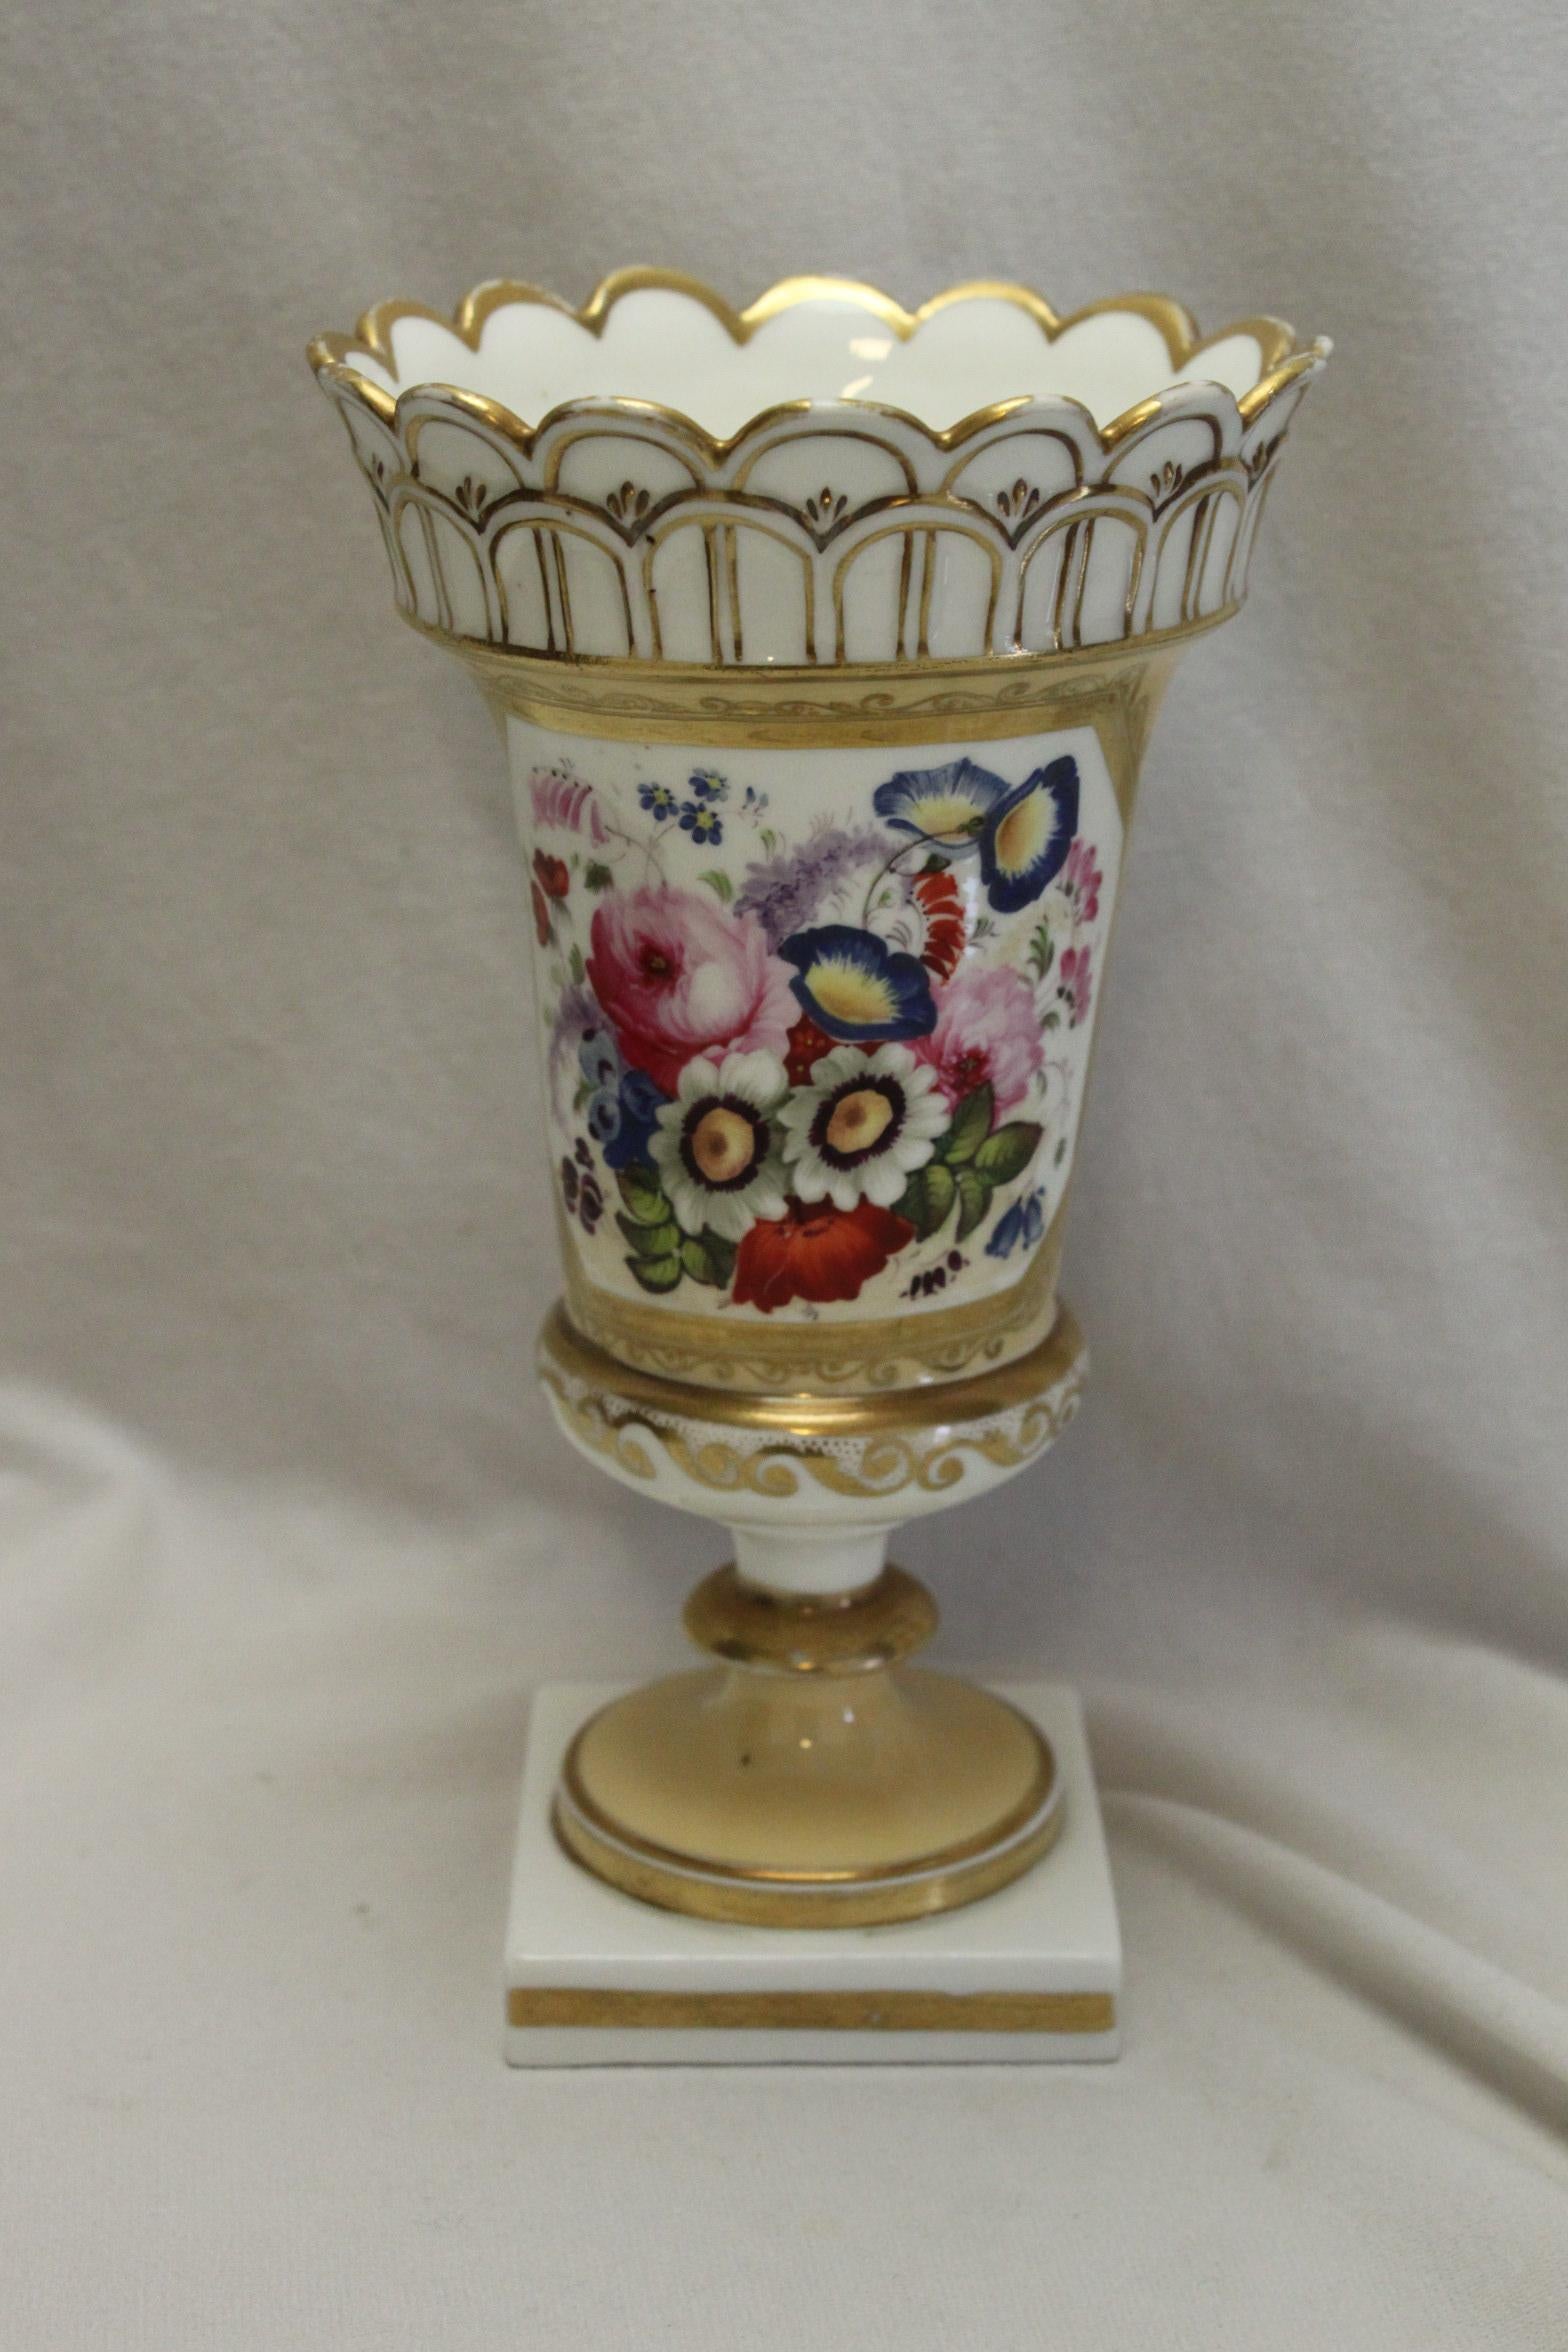 This very pretty hand painted and gilded porcelain vase is attributed to Minton, from their 